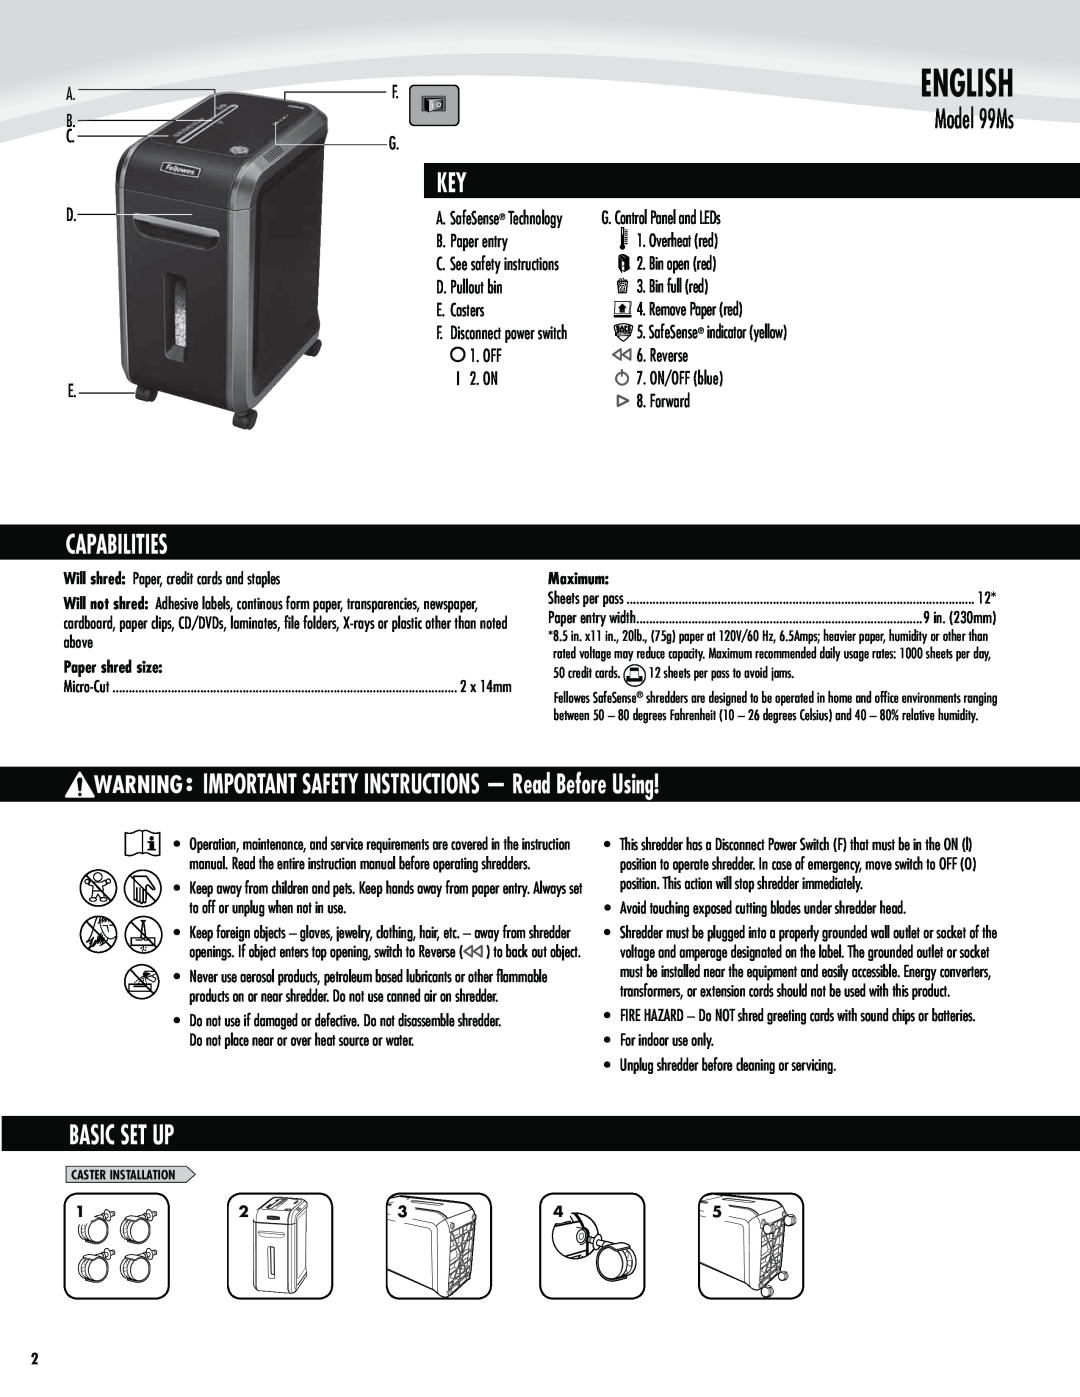 Fellowes 99Ms manual Capabilities, IMPORTANT SAFETY INSTRUCTIONS - Read Before Using, Basic Set Up, English 